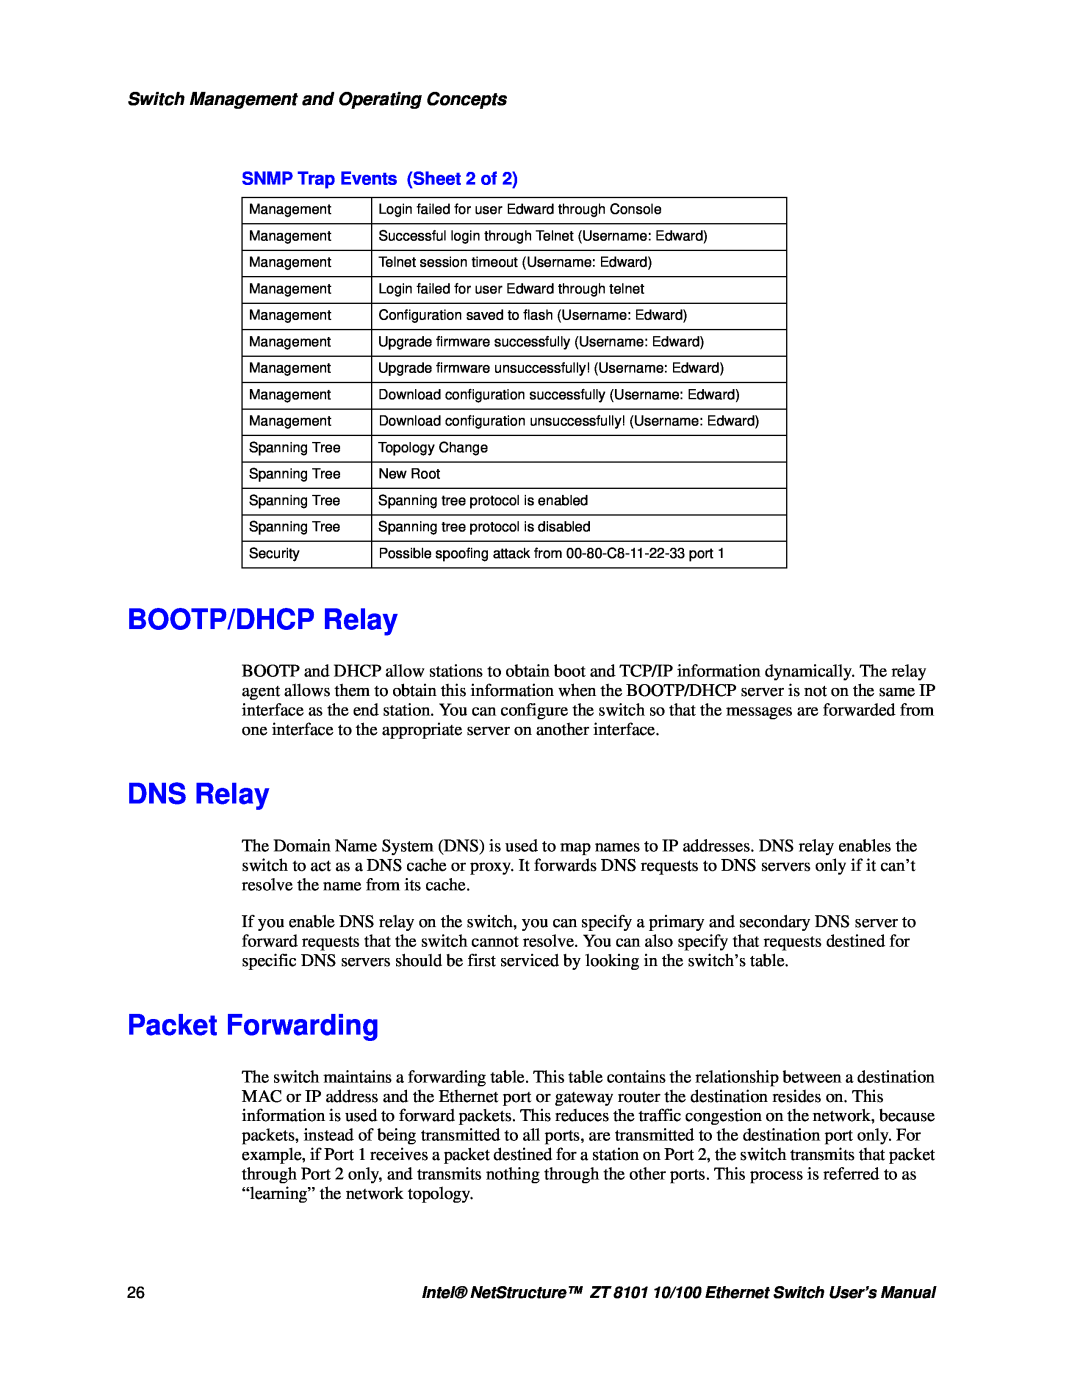 Intel ZT 8101 10/100 user manual BOOTP/DHCP Relay, DNS Relay, Packet Forwarding, SNMP Trap Events Sheet 2 of 